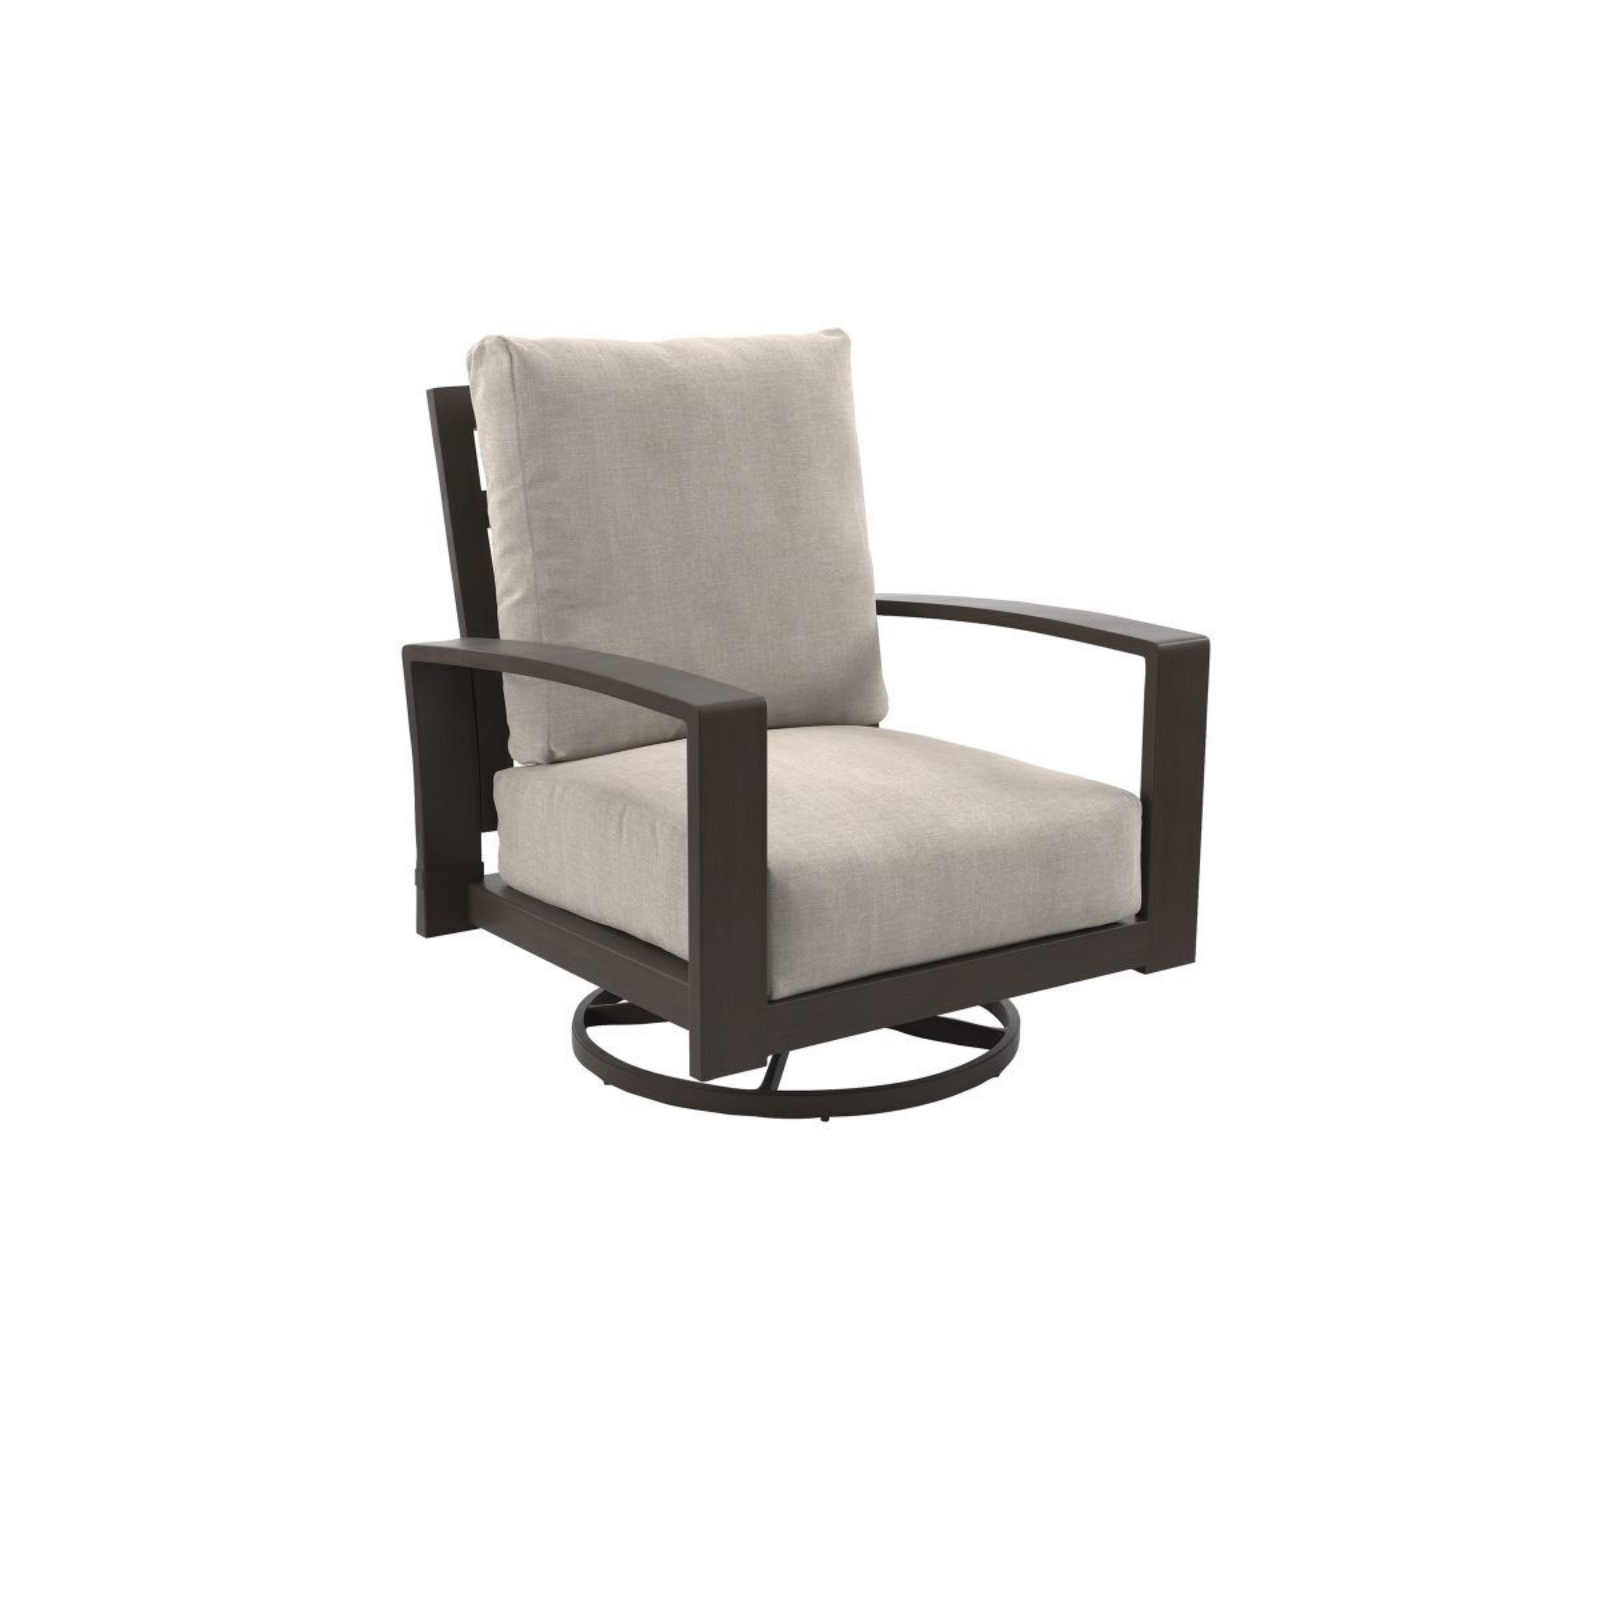 Picture of Cordova Reef Patio Swivel Chairs (Set of 2 Chairs)